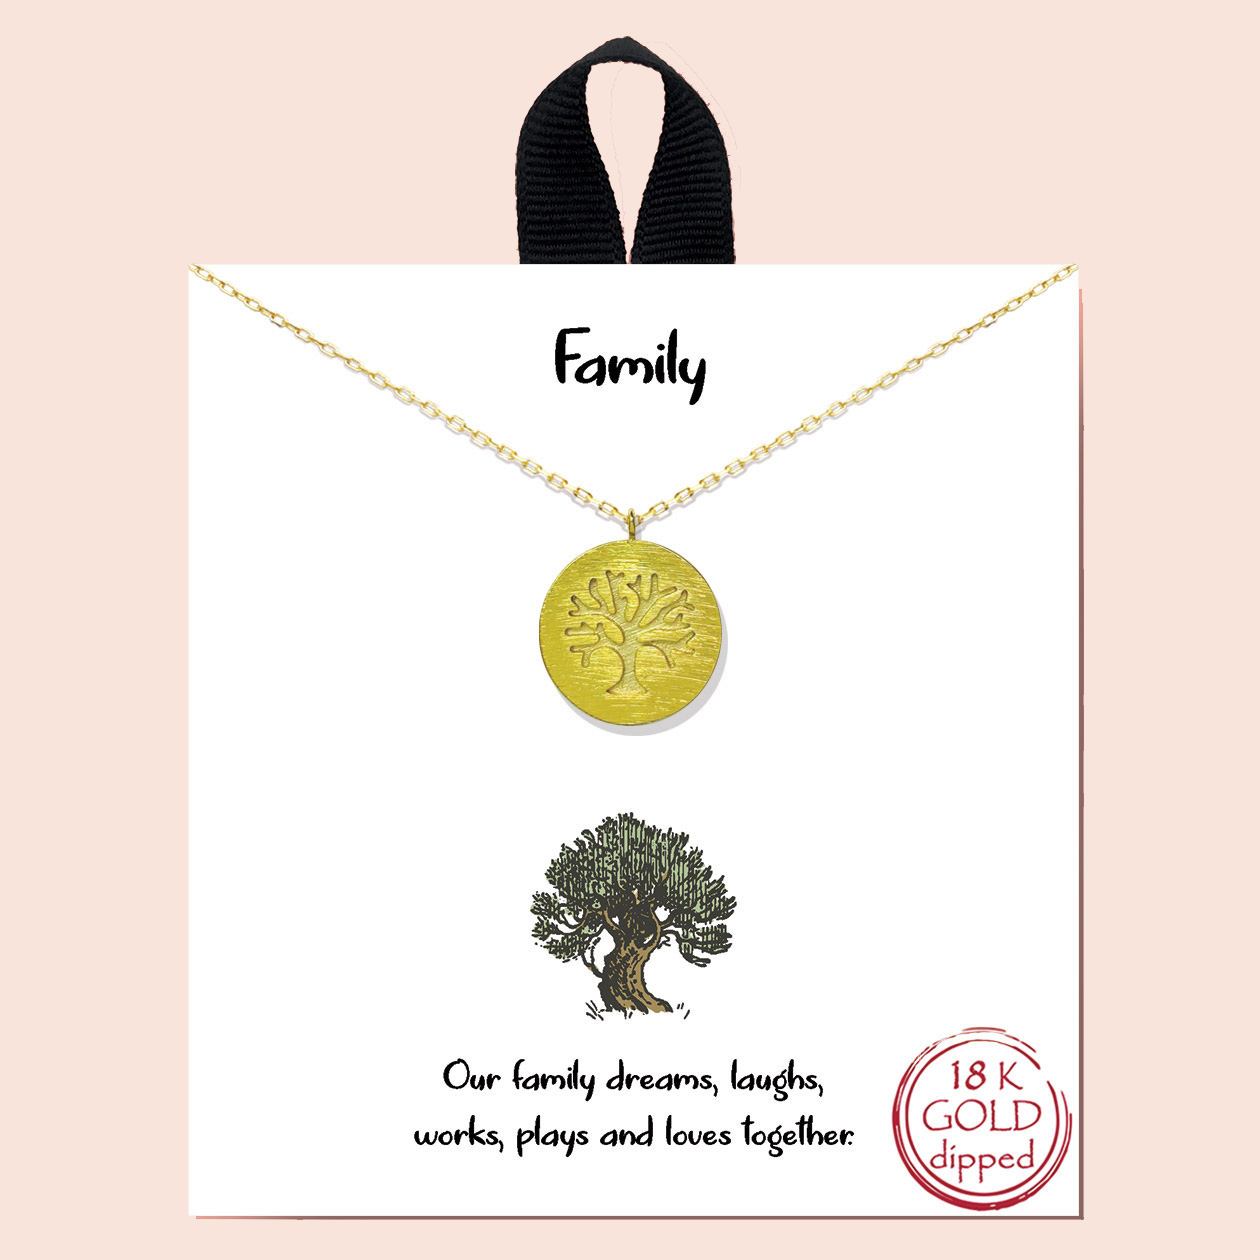 84029_Gold, &quotfamily" tree necklace/18k gold dipped